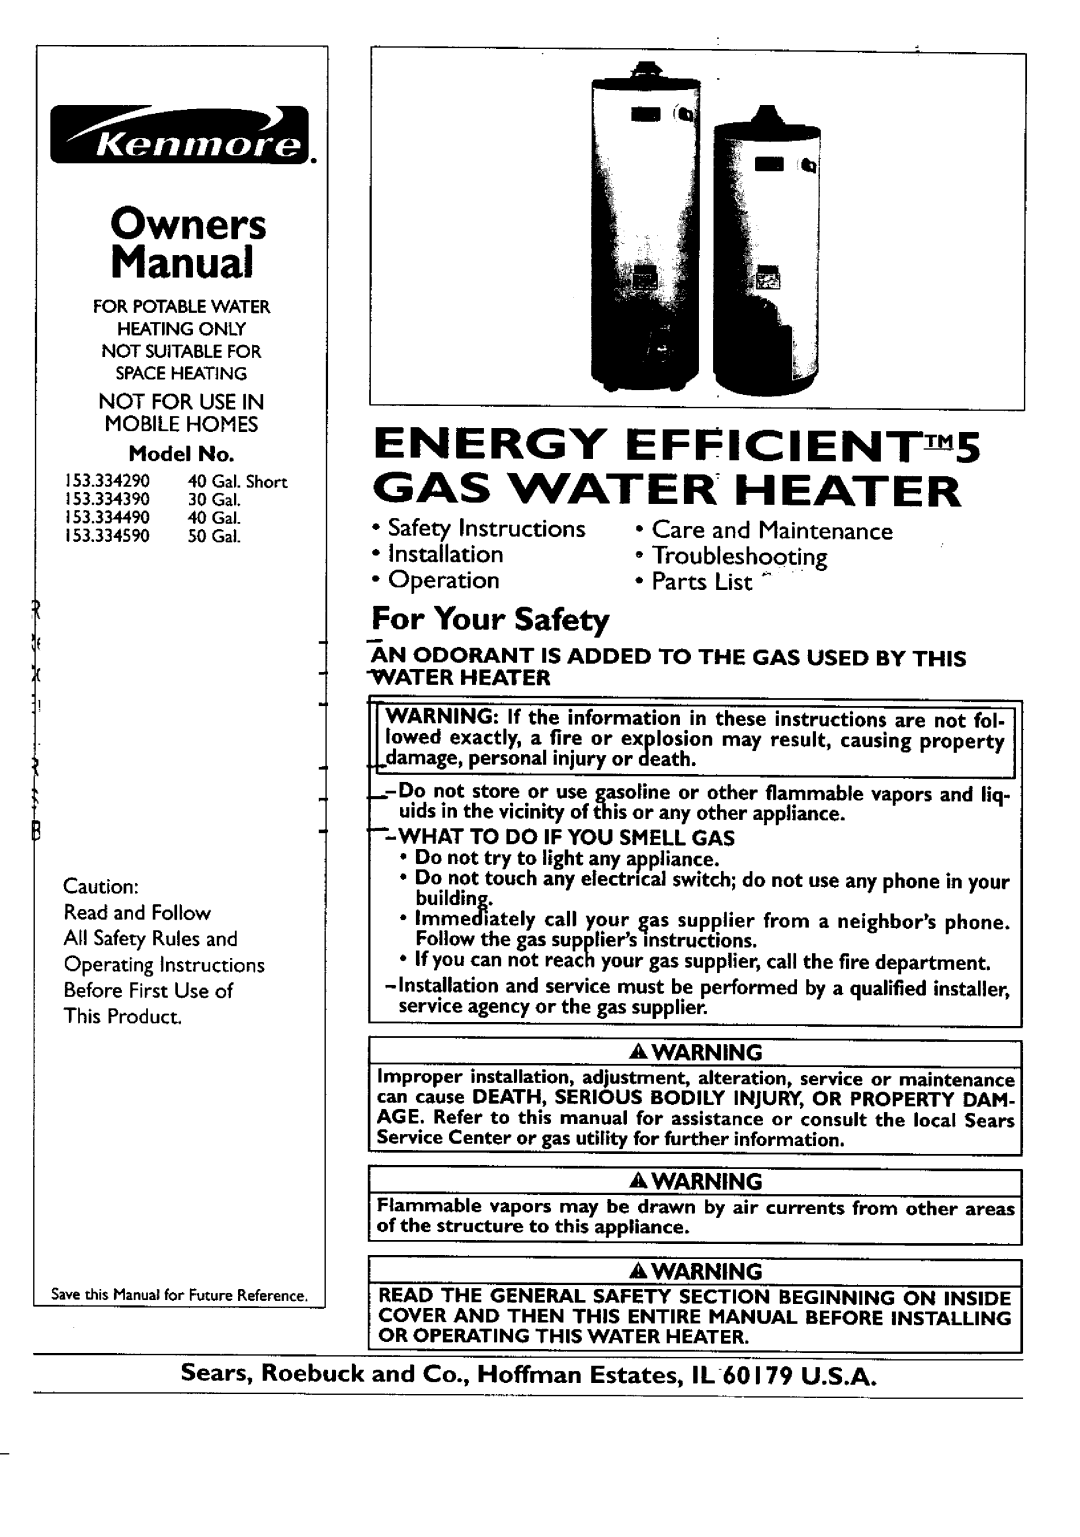 Kenmore 153.33449 owner manual For Your Safety, Safety Instructions Care and Maintenance, Installation, Troubleshooting 